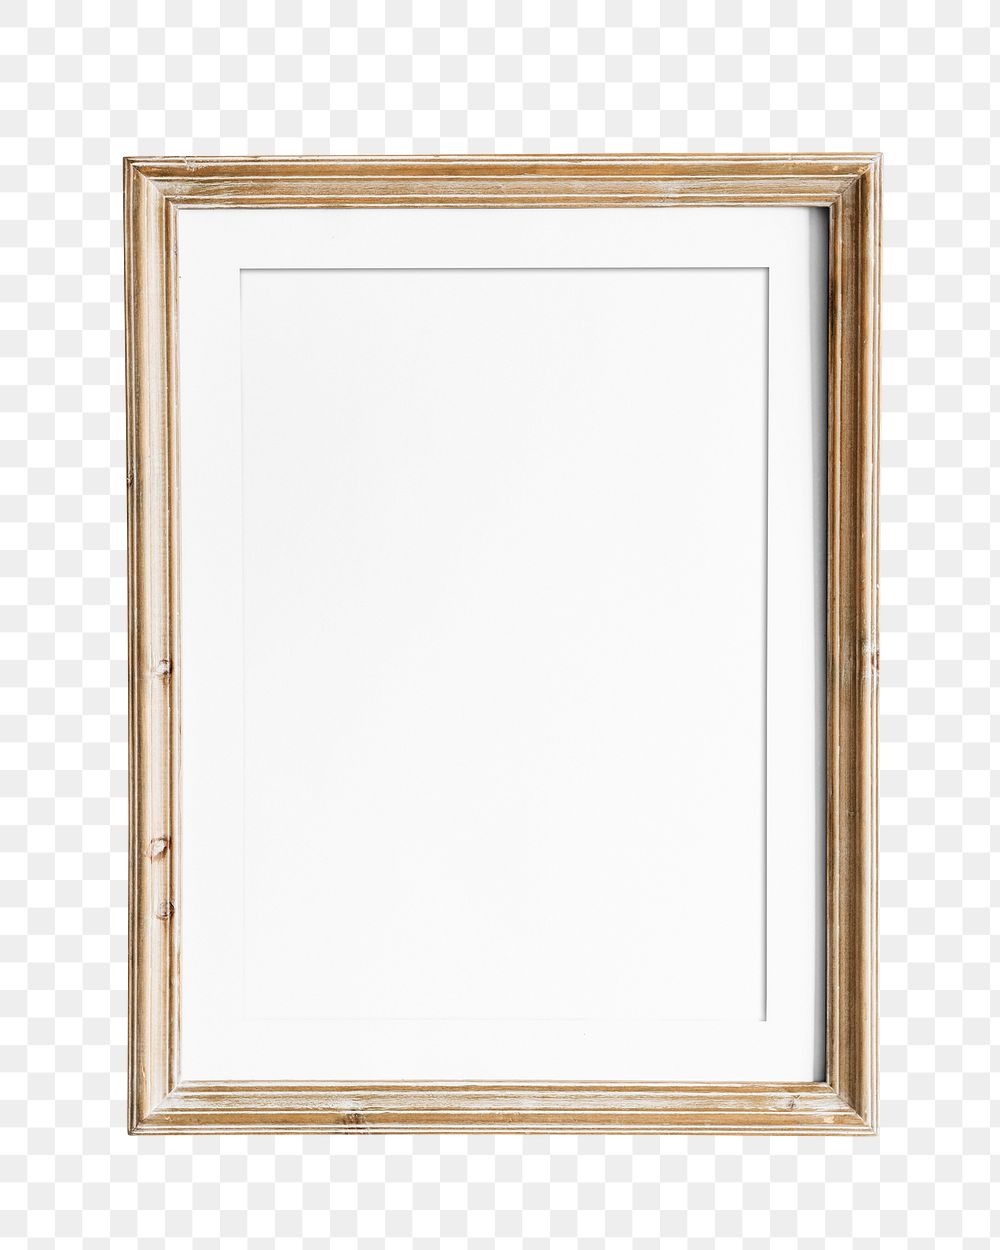 Classic wooden frame png sticker, transparent background